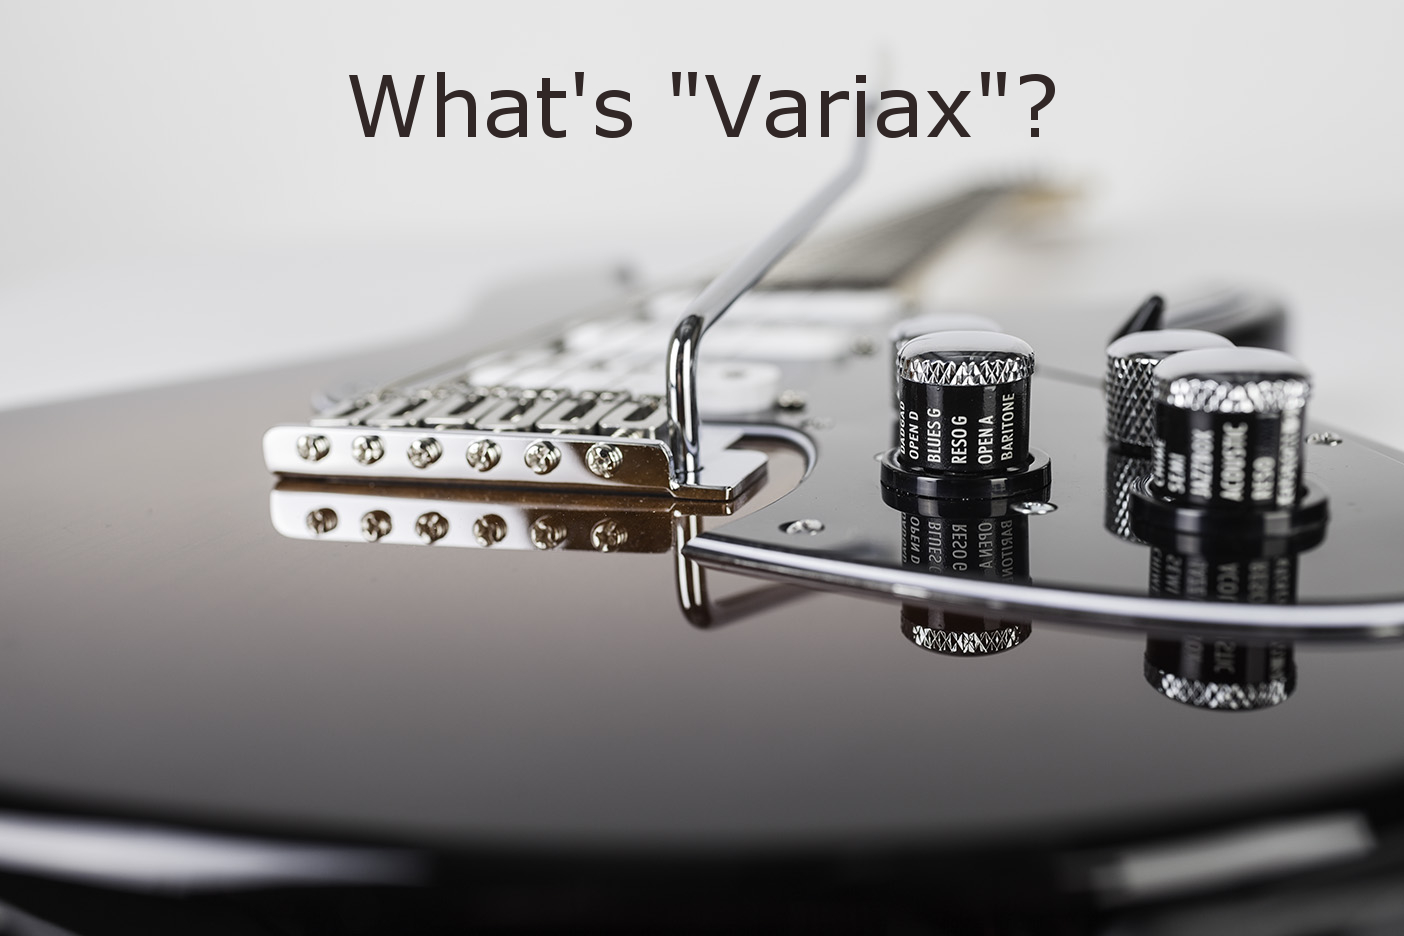 What's Variax?